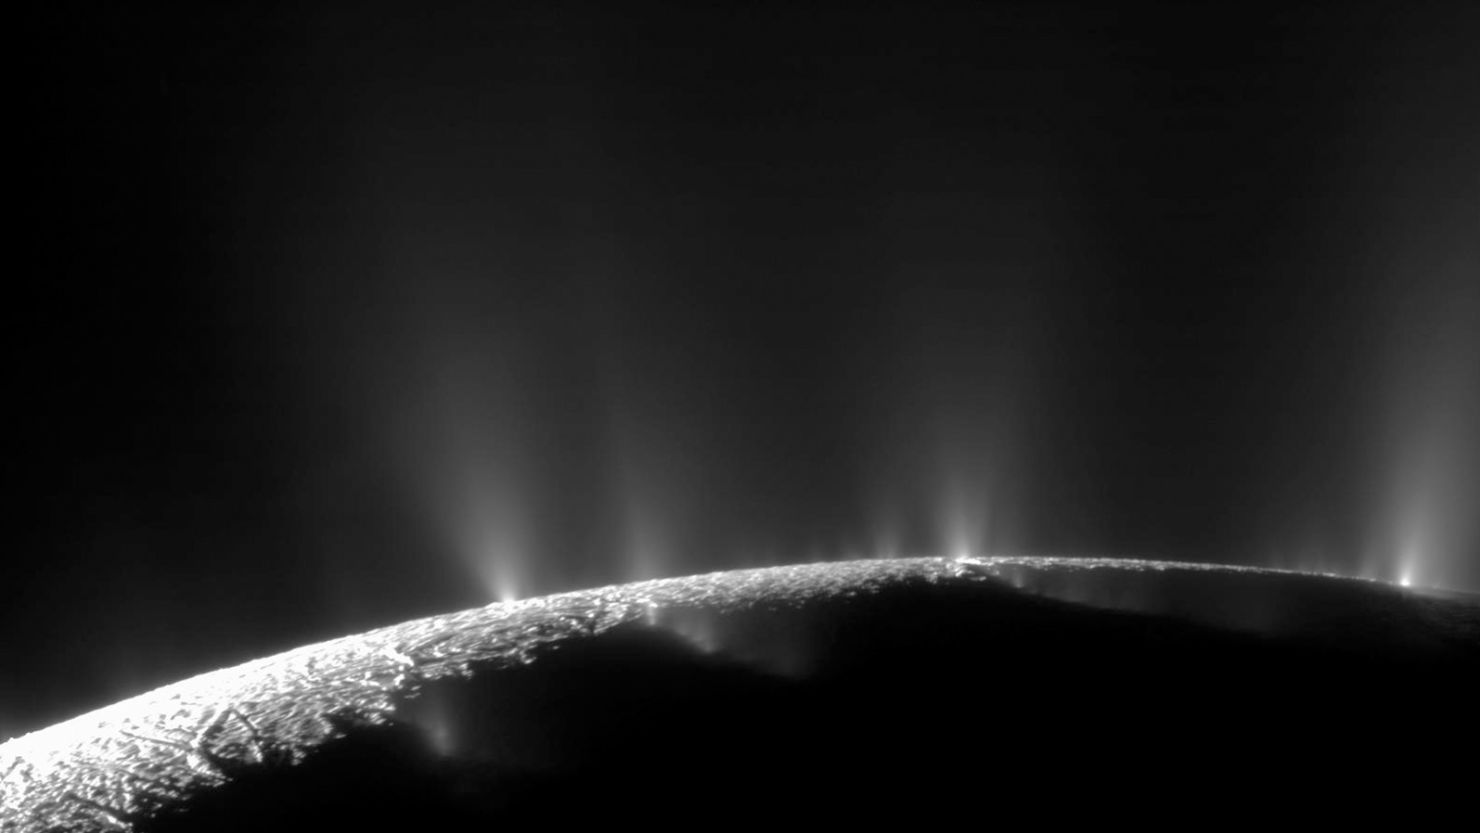 Dramatic plumes, both large and small, spray water ice out from many locations along the famed "tiger stripes" near the south pole of Saturn's moon Enceladus. The tiger stripes are fissures that spray icy particles, water vapor and organic compounds.